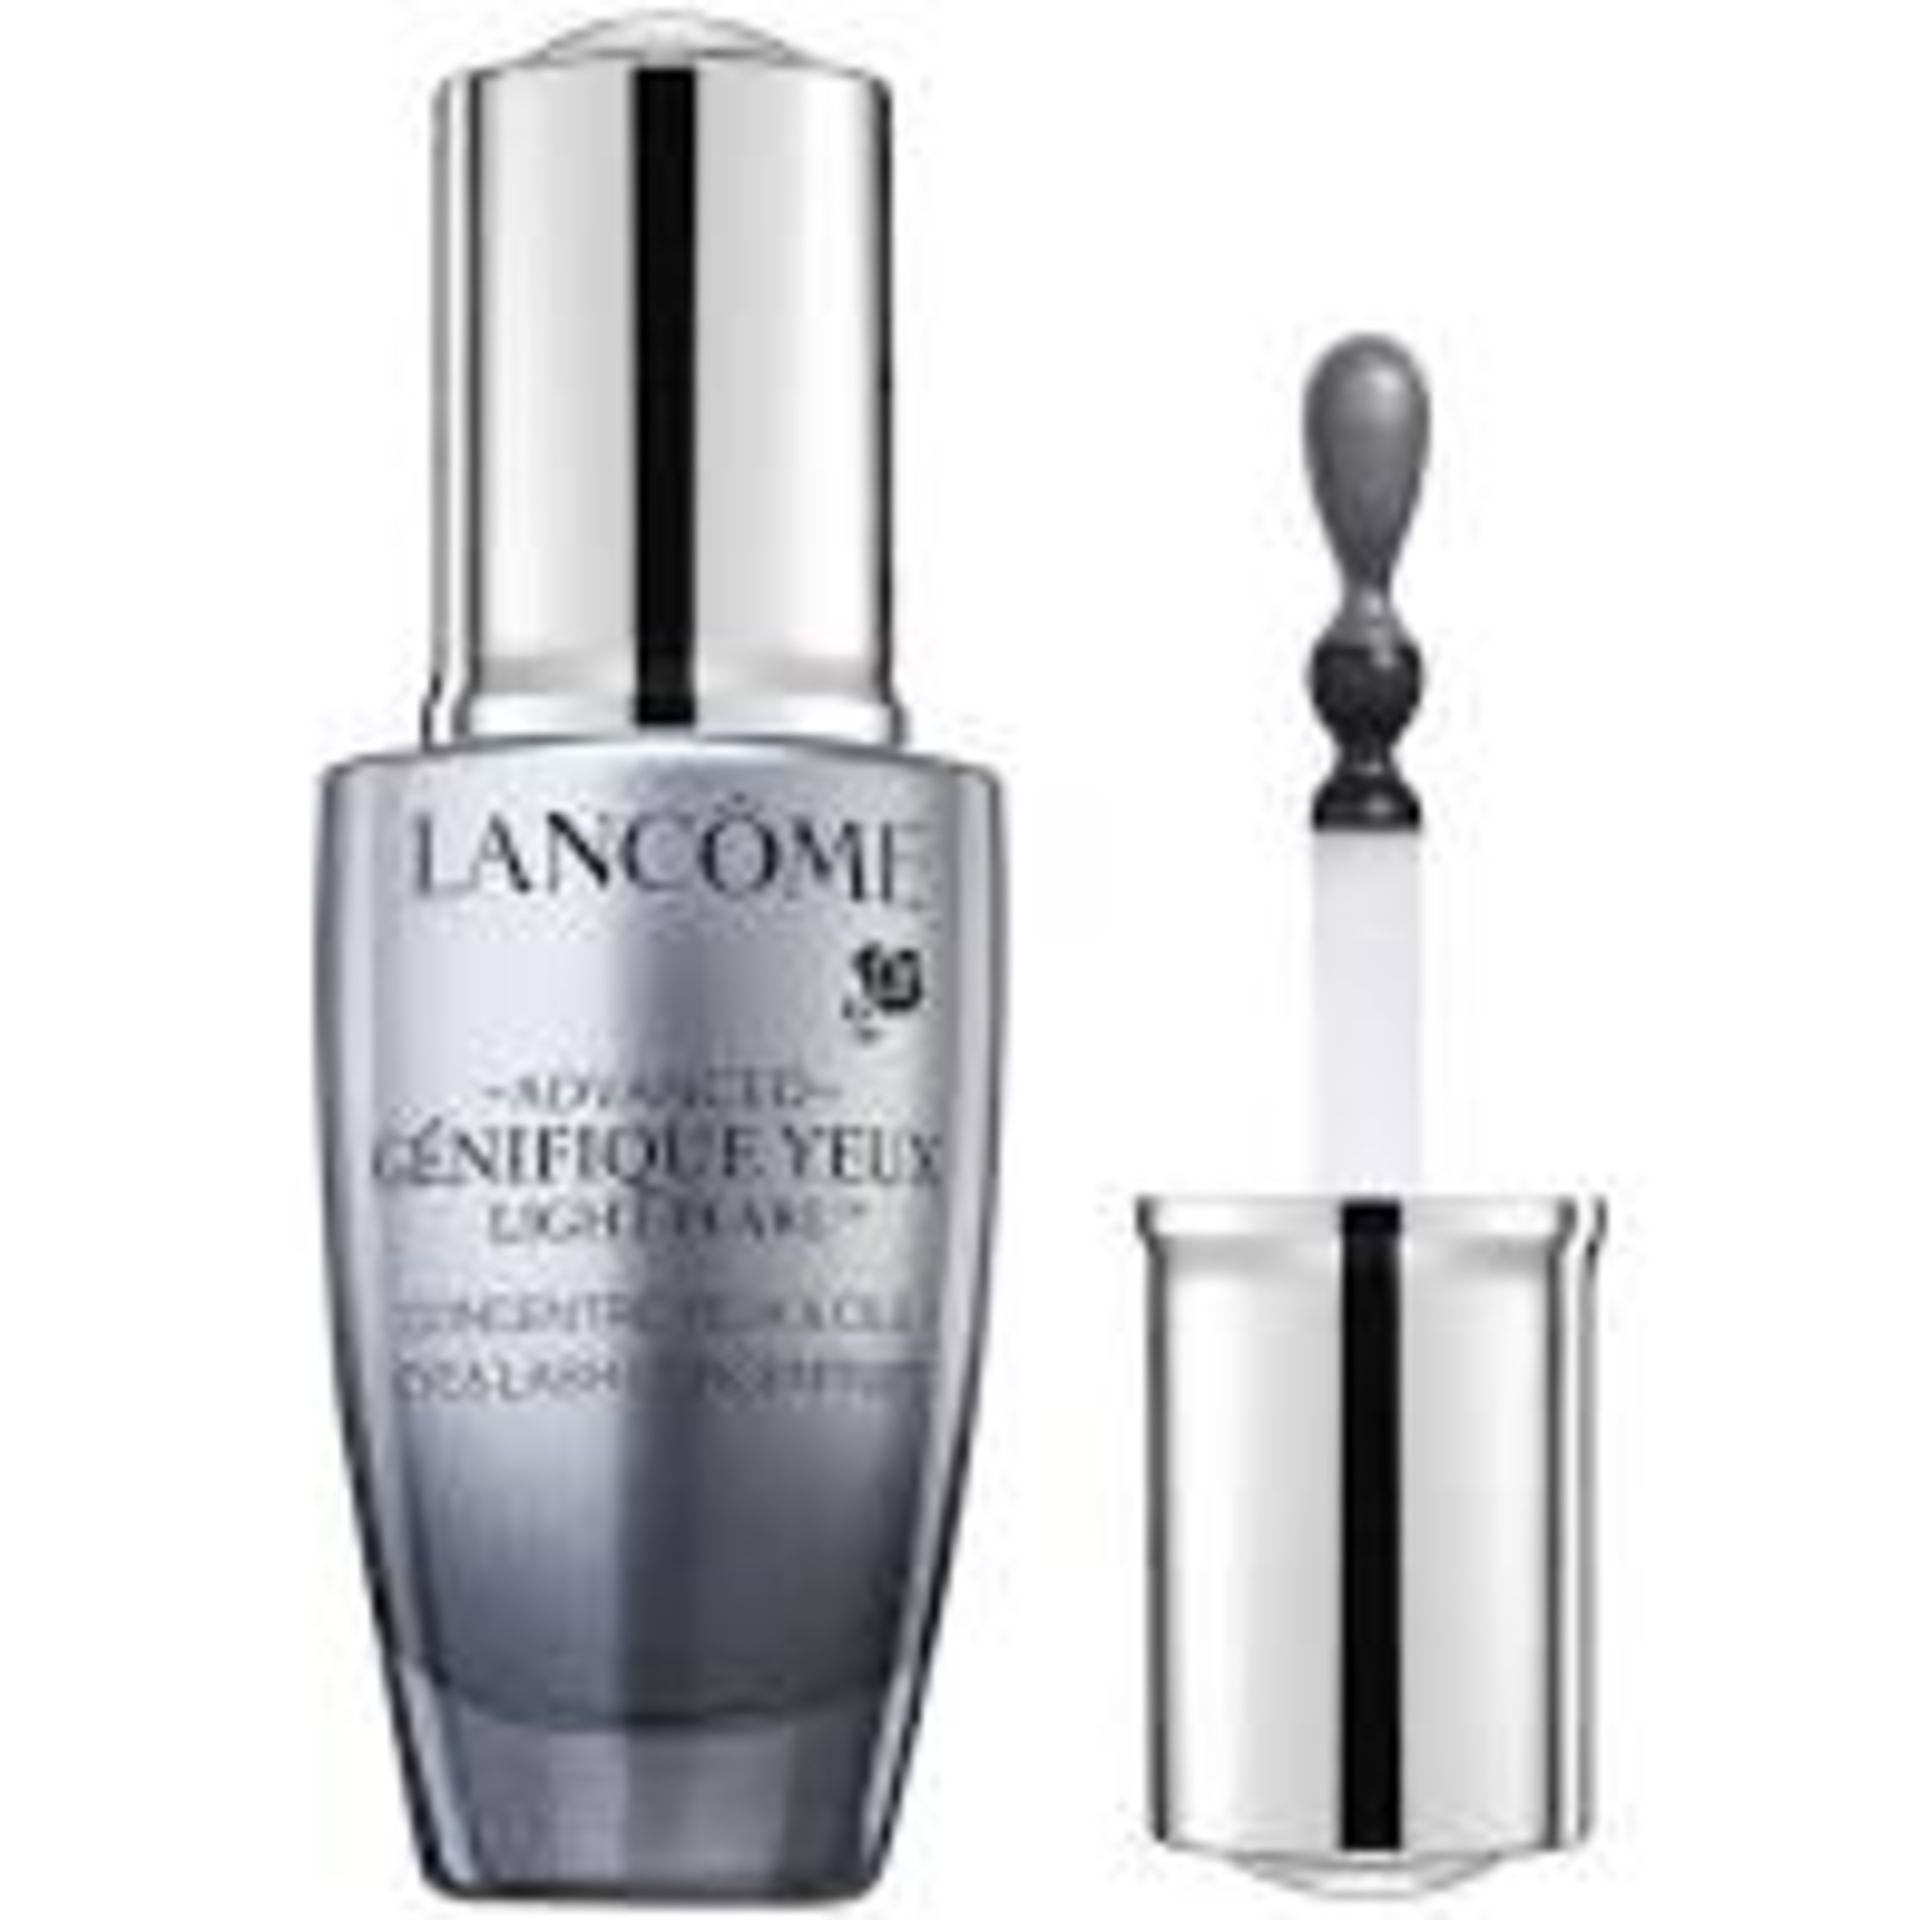 RRP £49 Lancome Eye & Lash Concentrate 20ml (Ex Display) (Appraisals Available Upon Request) (